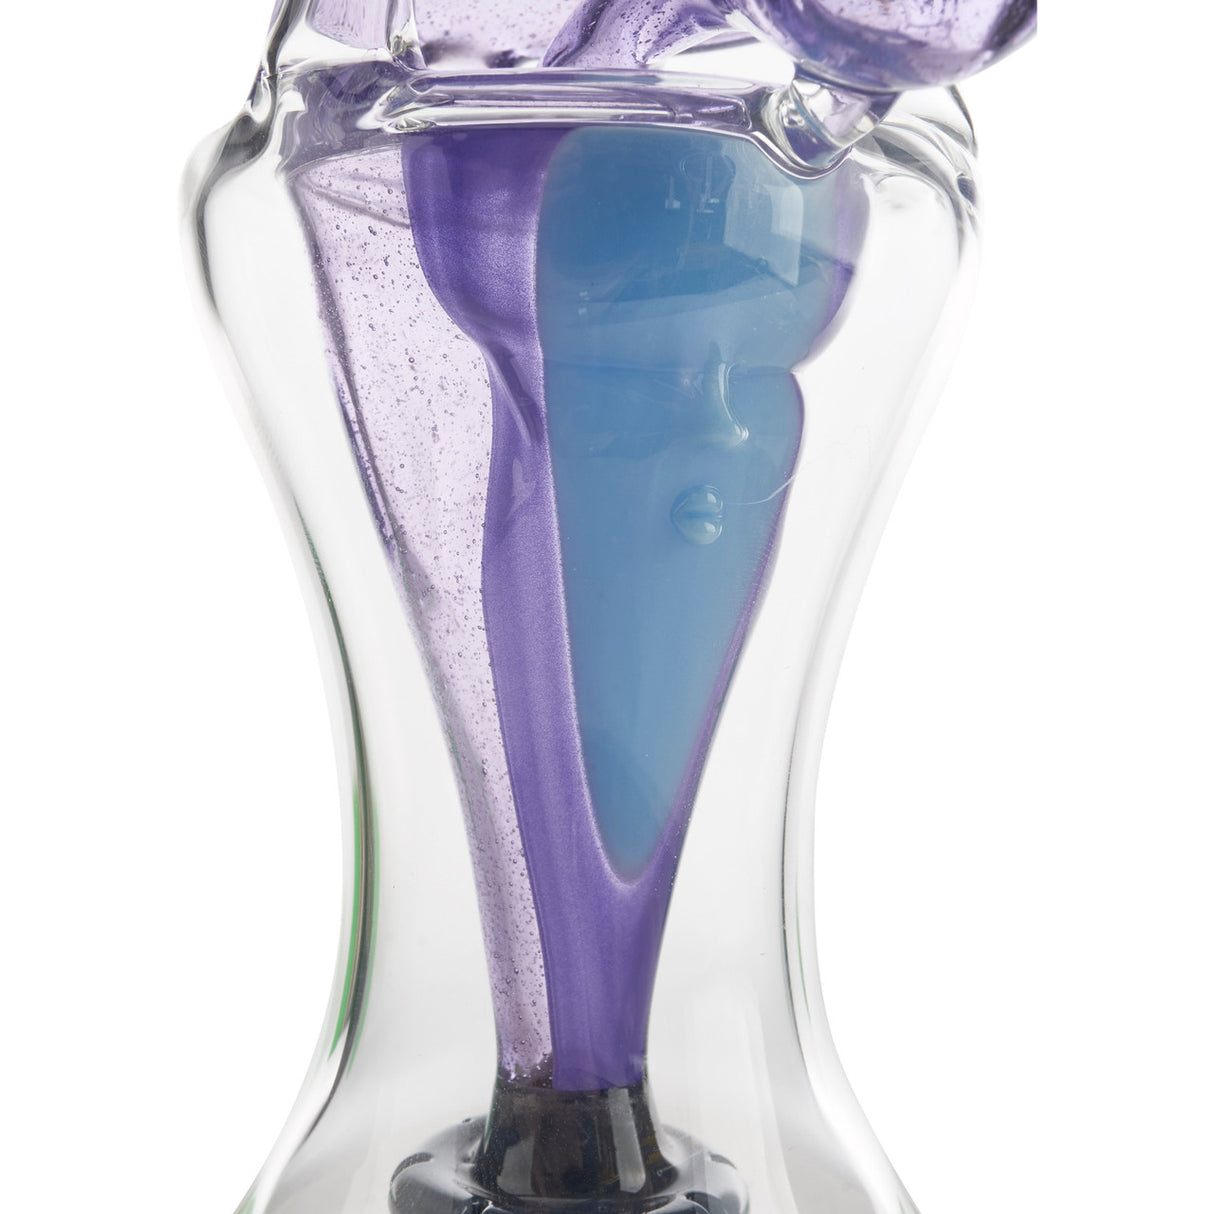 chip x bohowe glass head stack water pipe with purple and blue glass